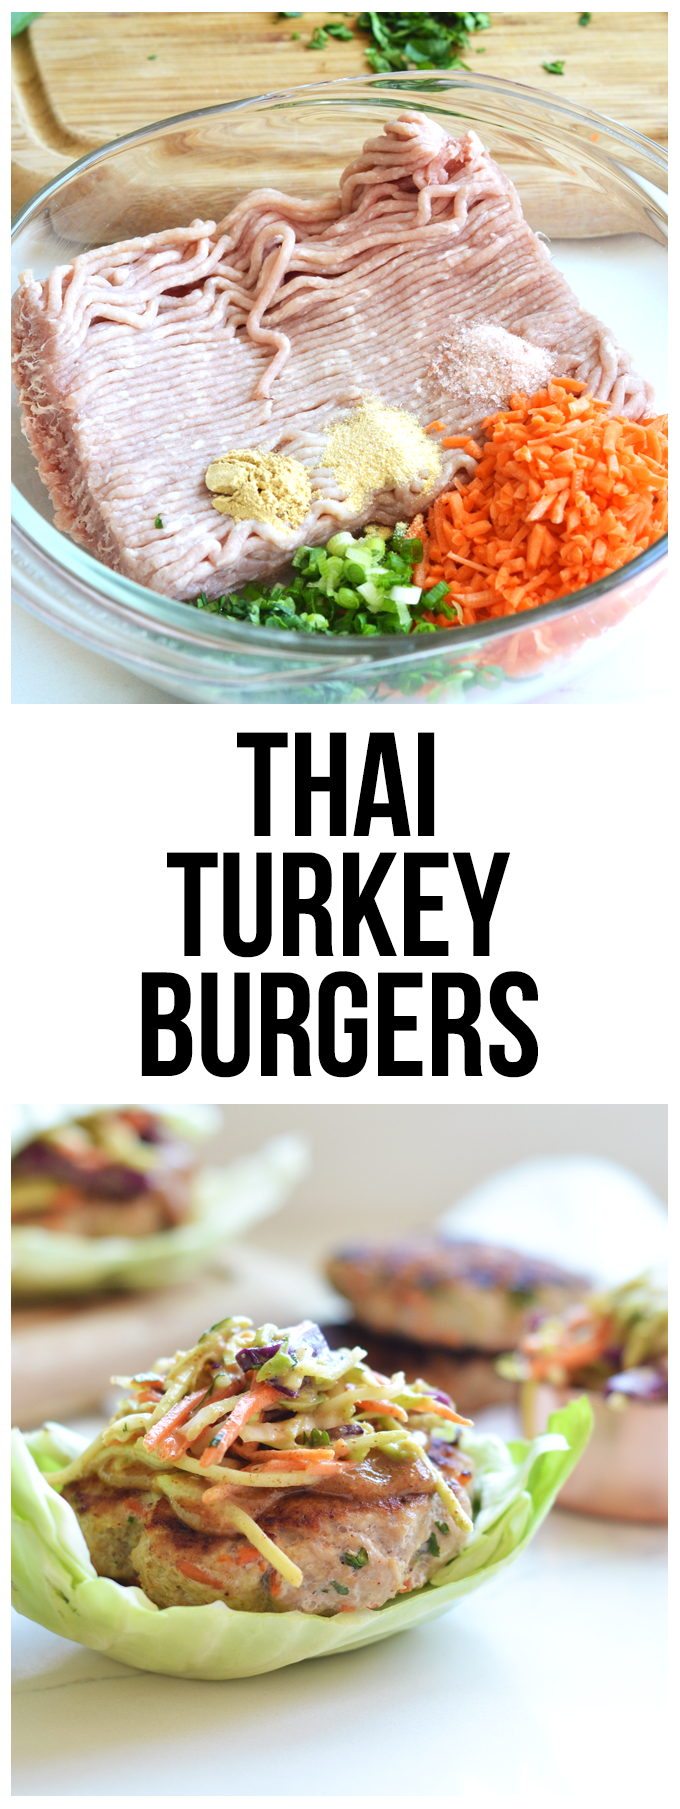 These Whole30 Turkey Burgers Thai Style are bursting with flavor and are super clean! Perfect meal for summer!